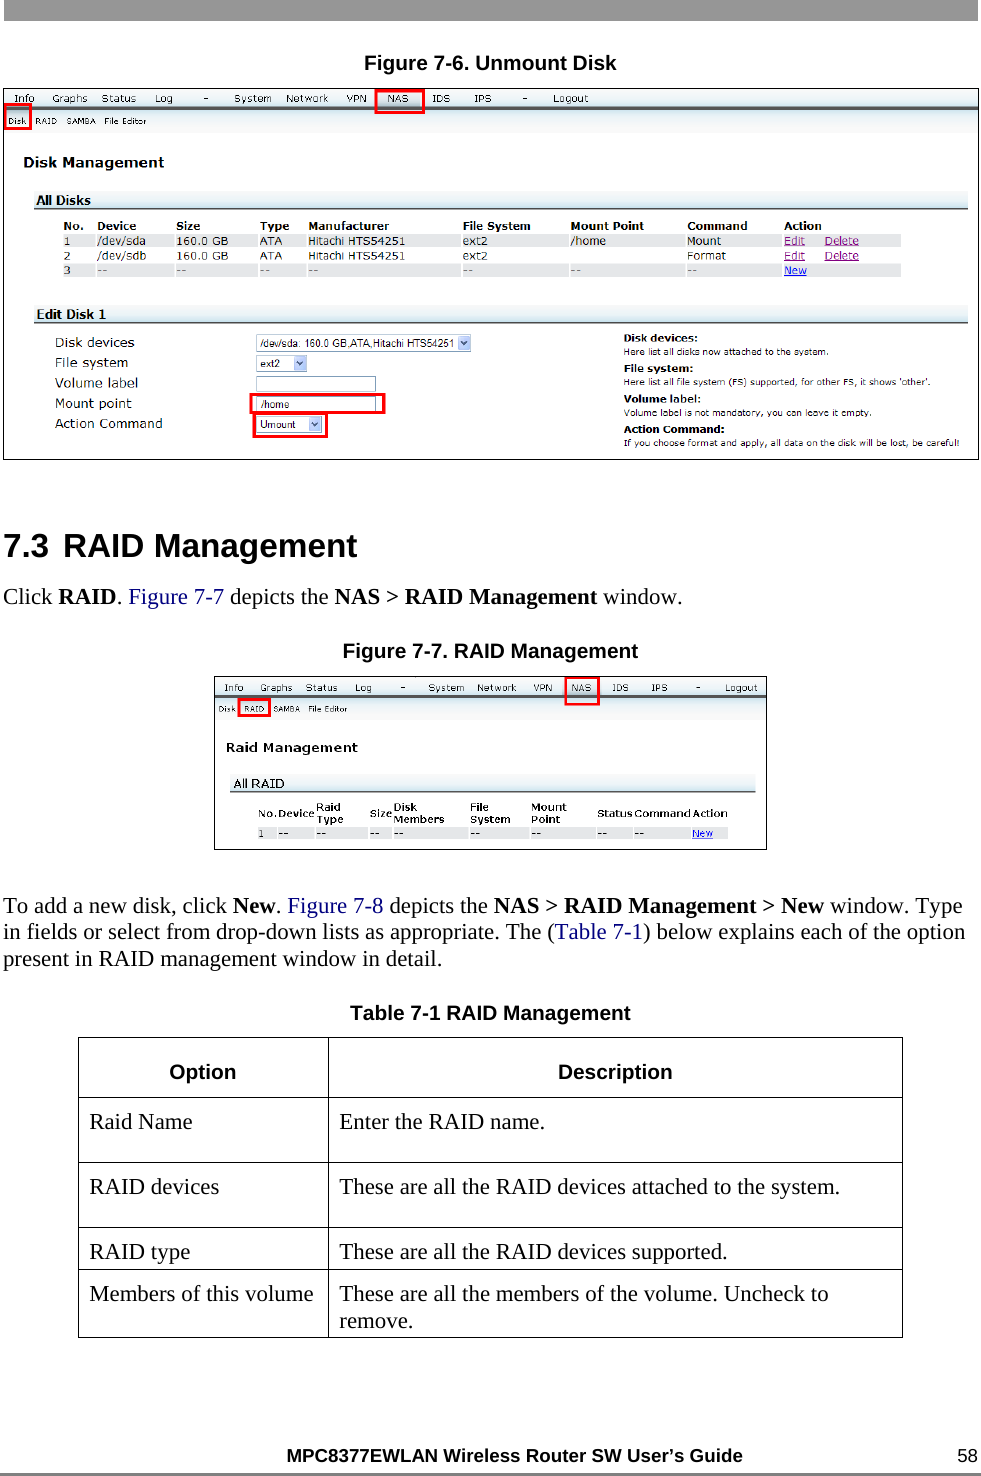                                                          MPC8377EWLAN Wireless Router SW User’s Guide    58 Figure 7-6. Unmount Disk  7.3 RAID Management Click RAID. Figure 7-7 depicts the NAS &gt; RAID Management window. Figure 7-7. RAID Management  To add a new disk, click New. Figure 7-8 depicts the NAS &gt; RAID Management &gt; New window. Type in fields or select from drop-down lists as appropriate. The (Table 7-1) below explains each of the option present in RAID management window in detail. Table 7-1 RAID Management Option Description Raid Name  Enter the RAID name. RAID devices These are all the RAID devices attached to the system. RAID type These are all the RAID devices supported. Members of this volume These are all the members of the volume. Uncheck to remove. 